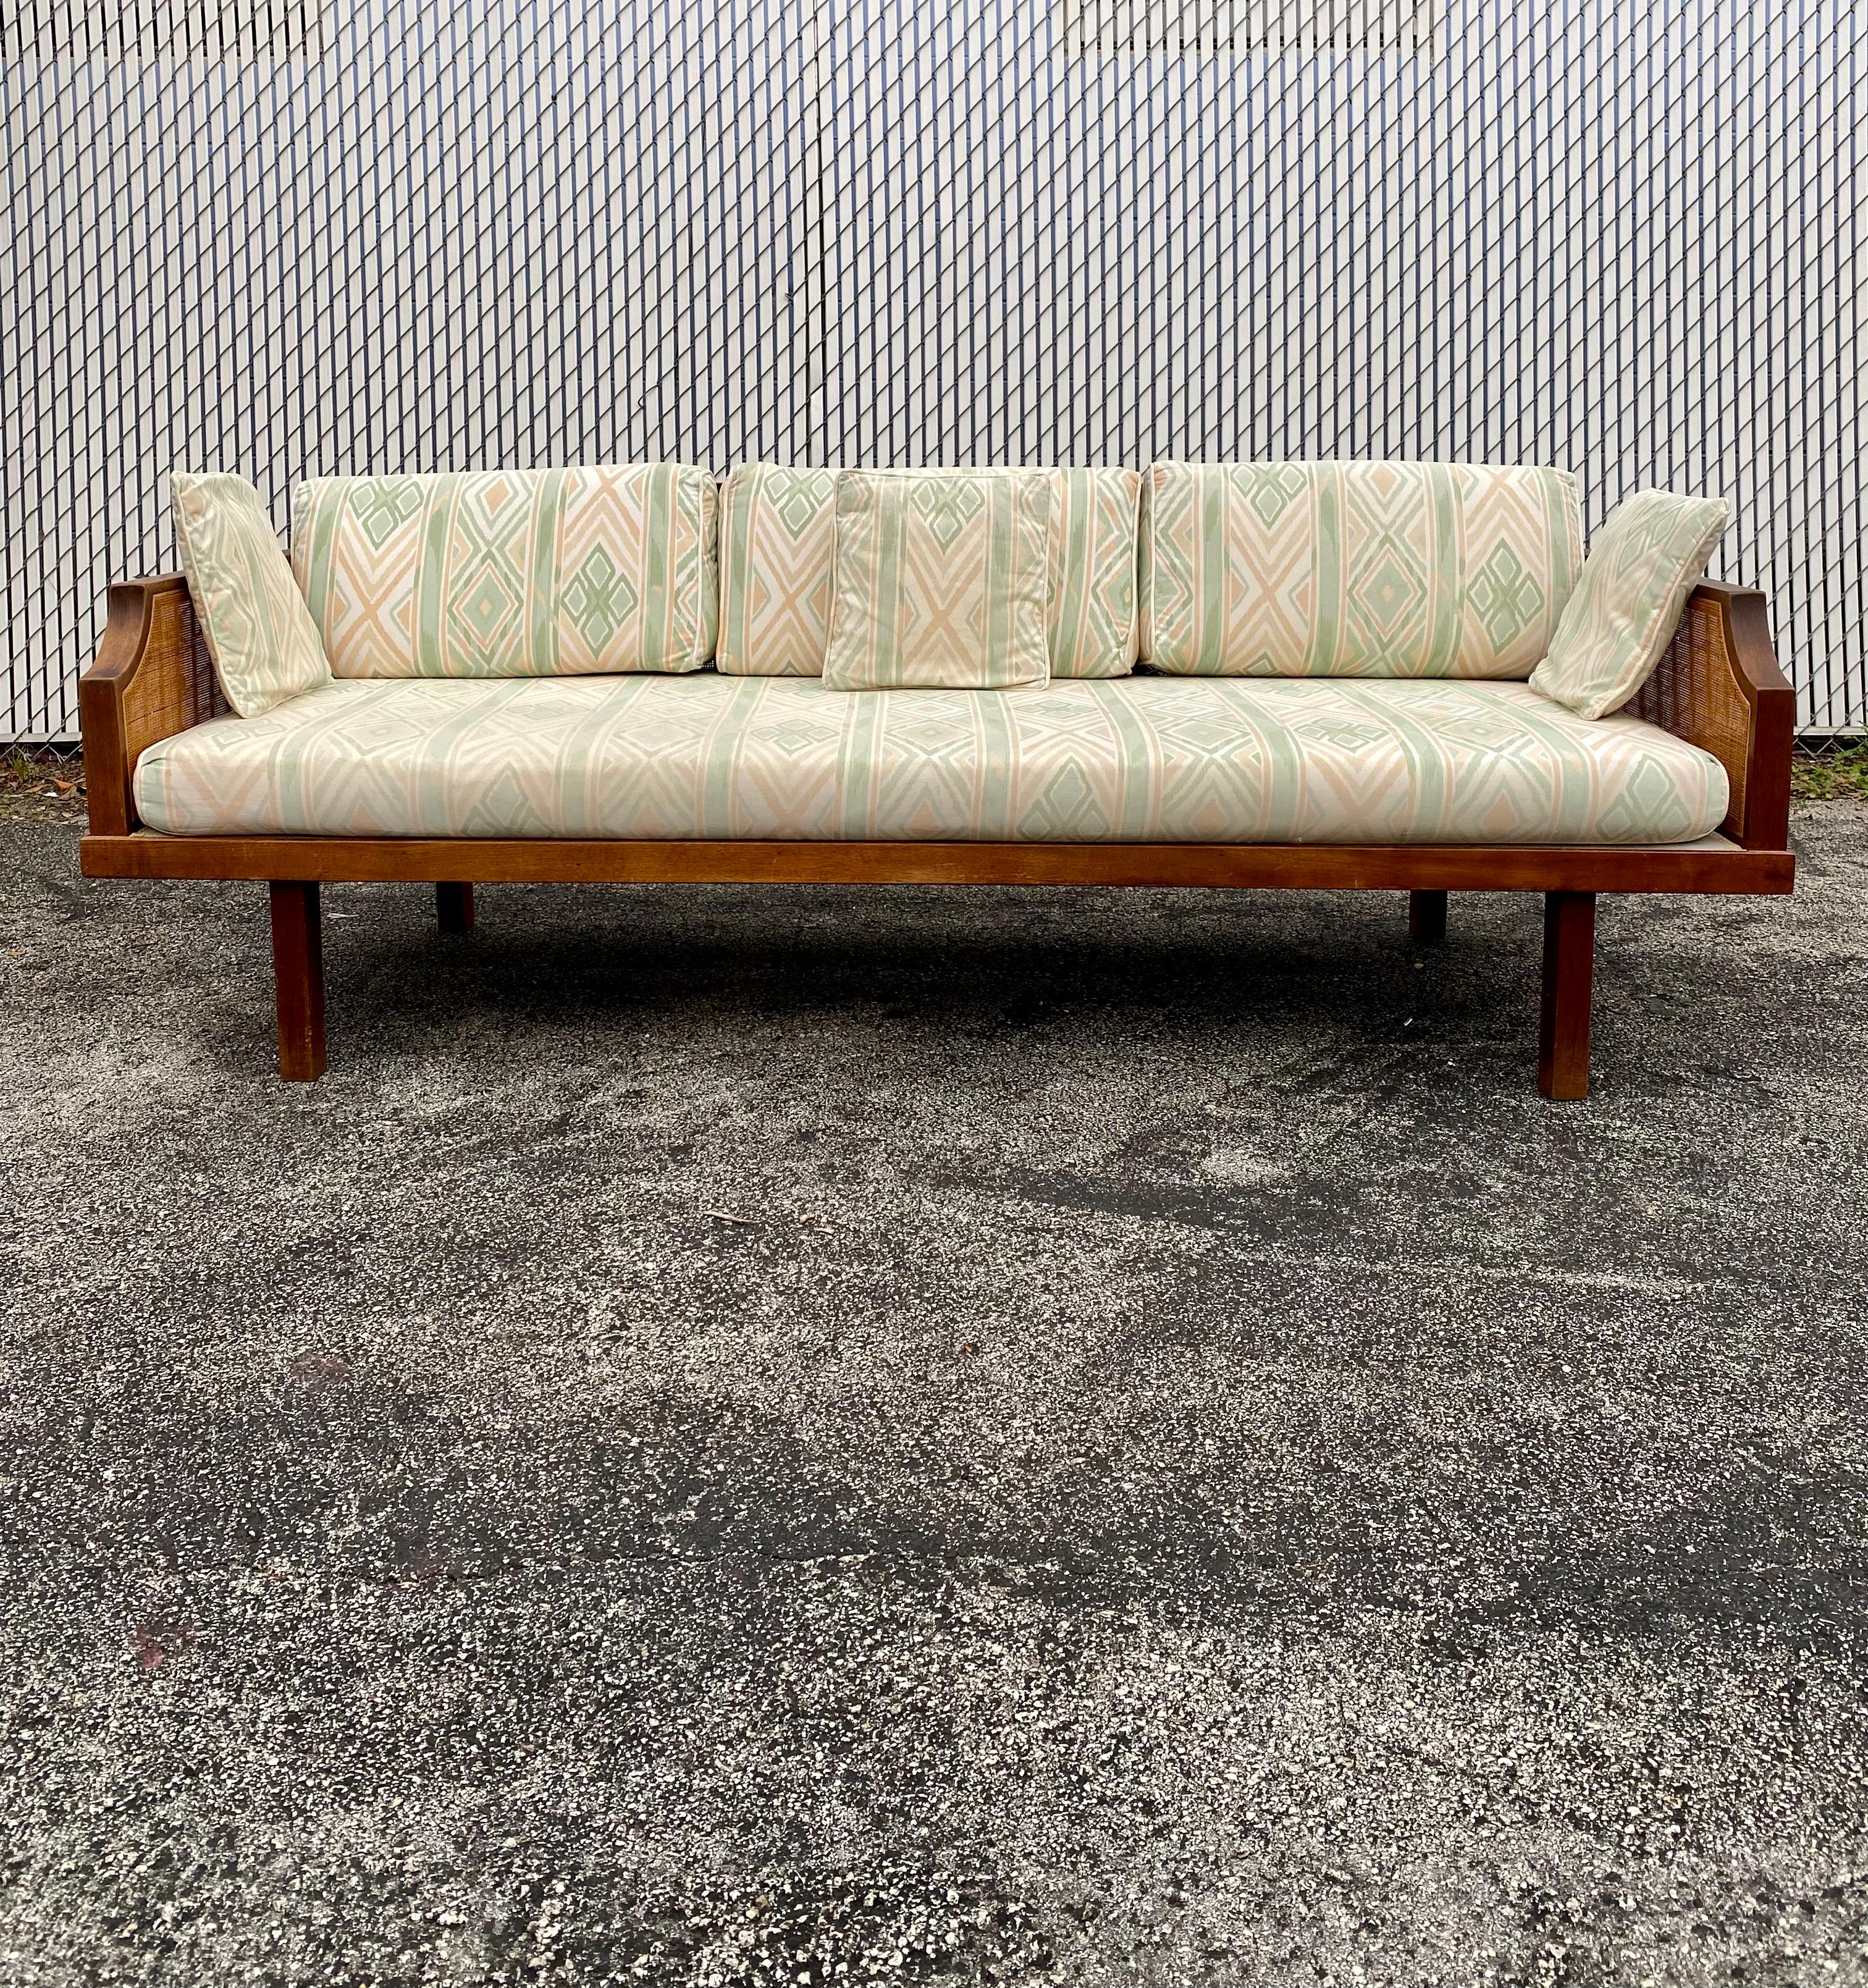 This rare mid-century rattan cane daybed/sofa is statement piece which is also extremely comfortable and packed with personality! This sofa is in great shape for its age. The support straps are also original and in fantastic condition. Just look at